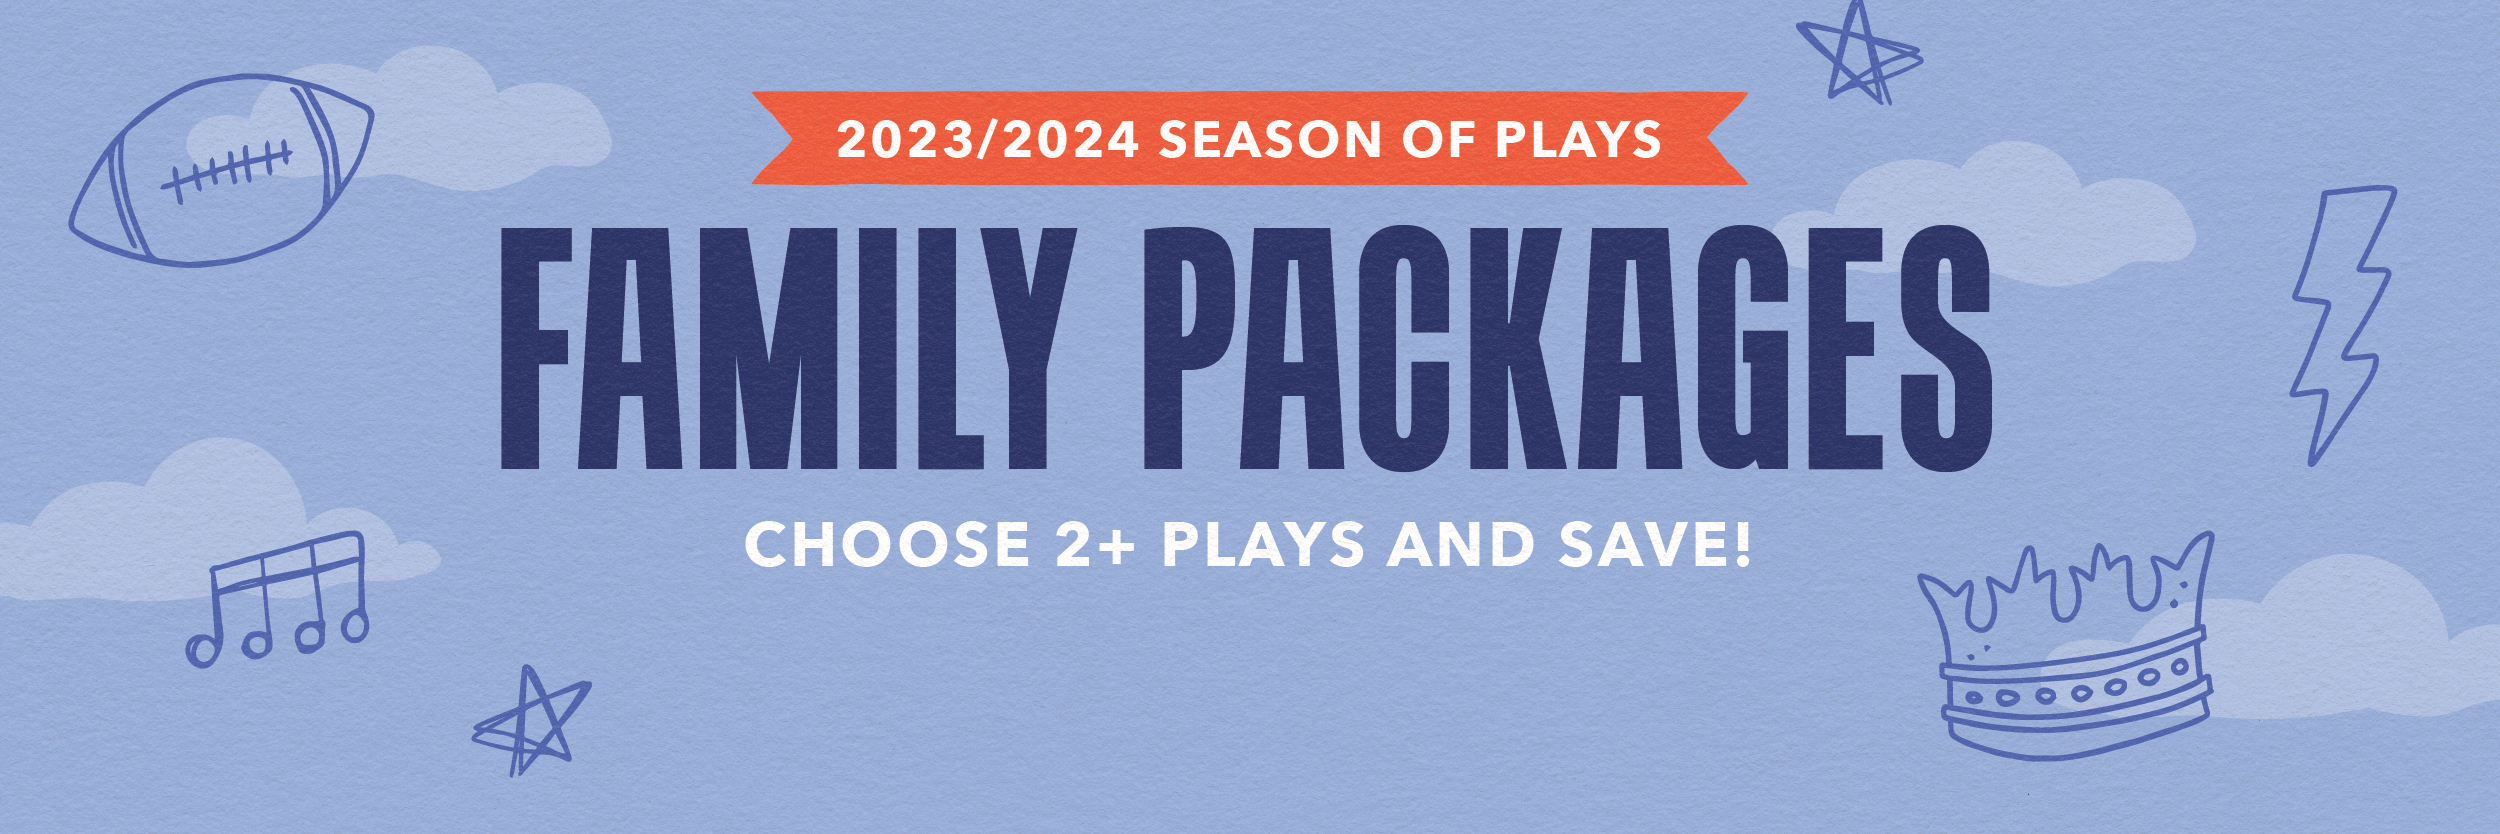 2023/2024 Season of Plays Family Packages